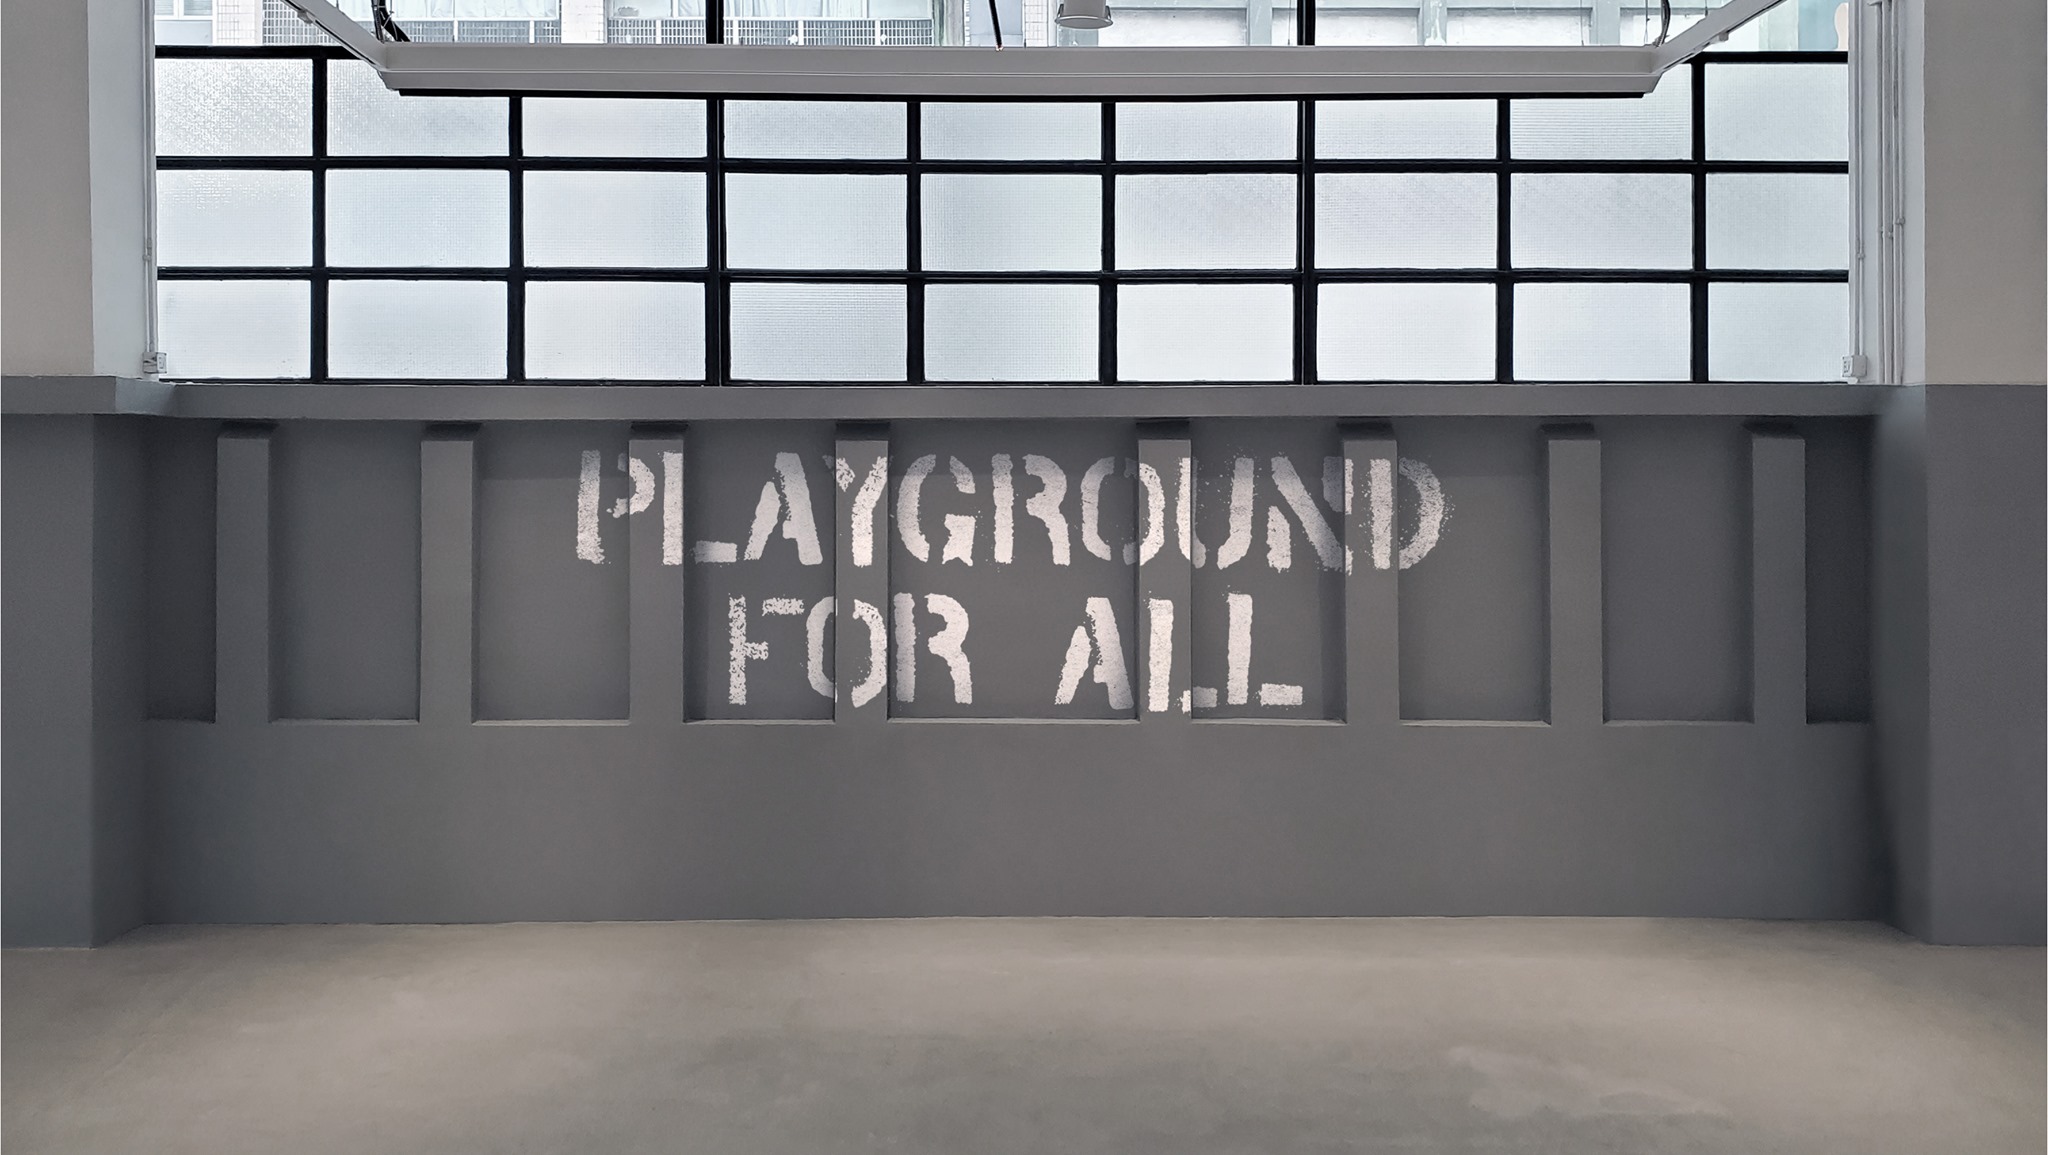 Playground for all